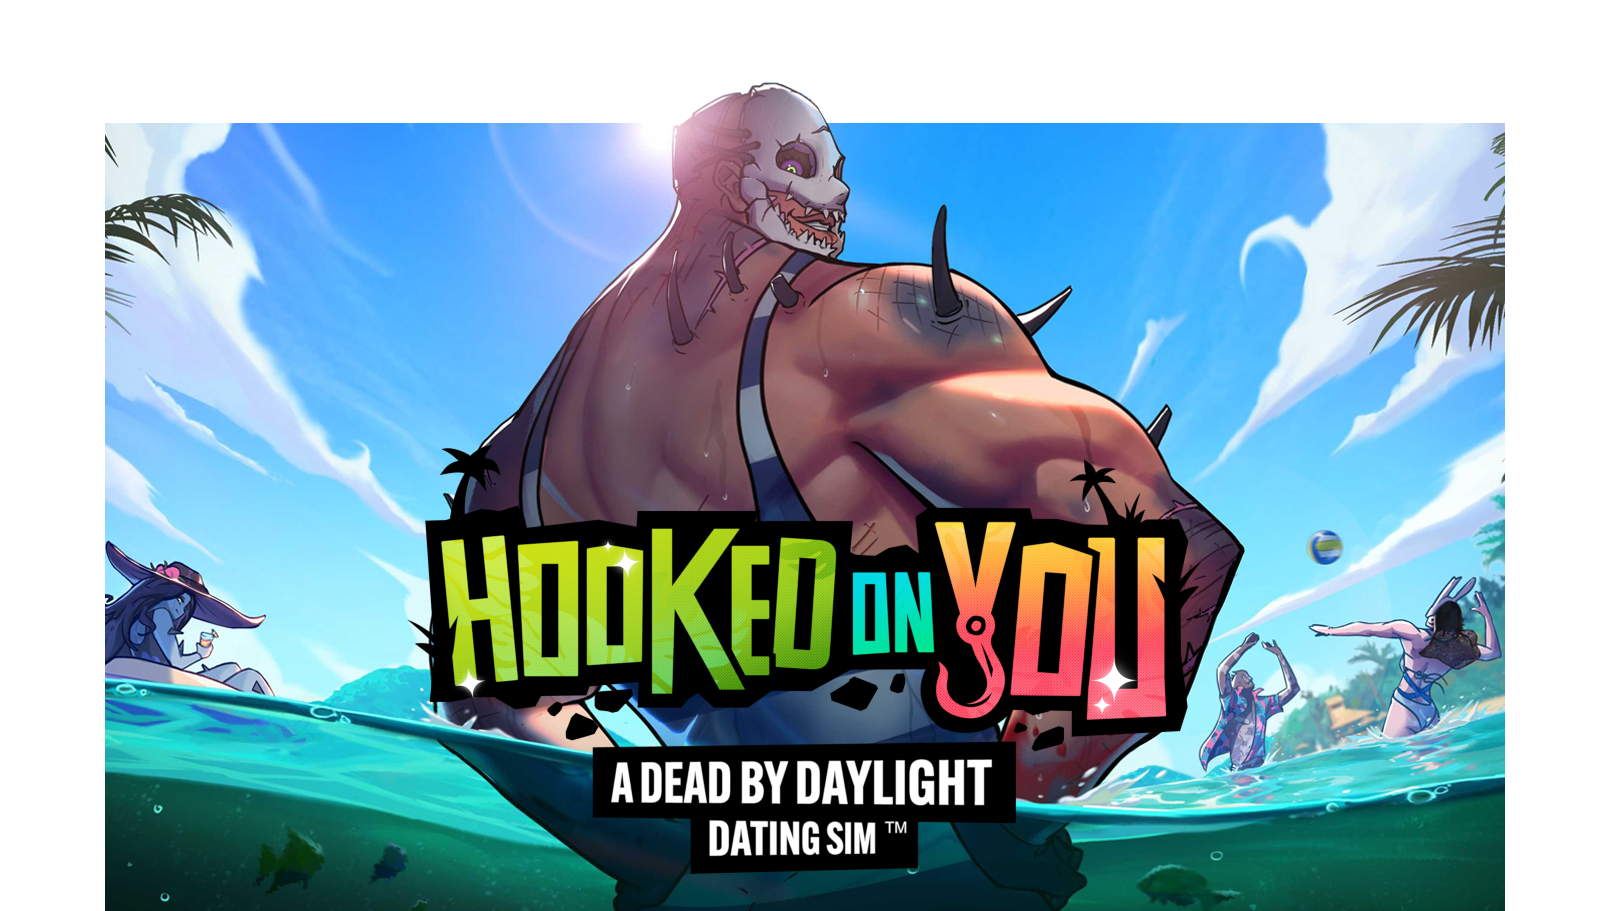 Dead by Daylight Dating Sim Hooked on You is Now Available - EIP